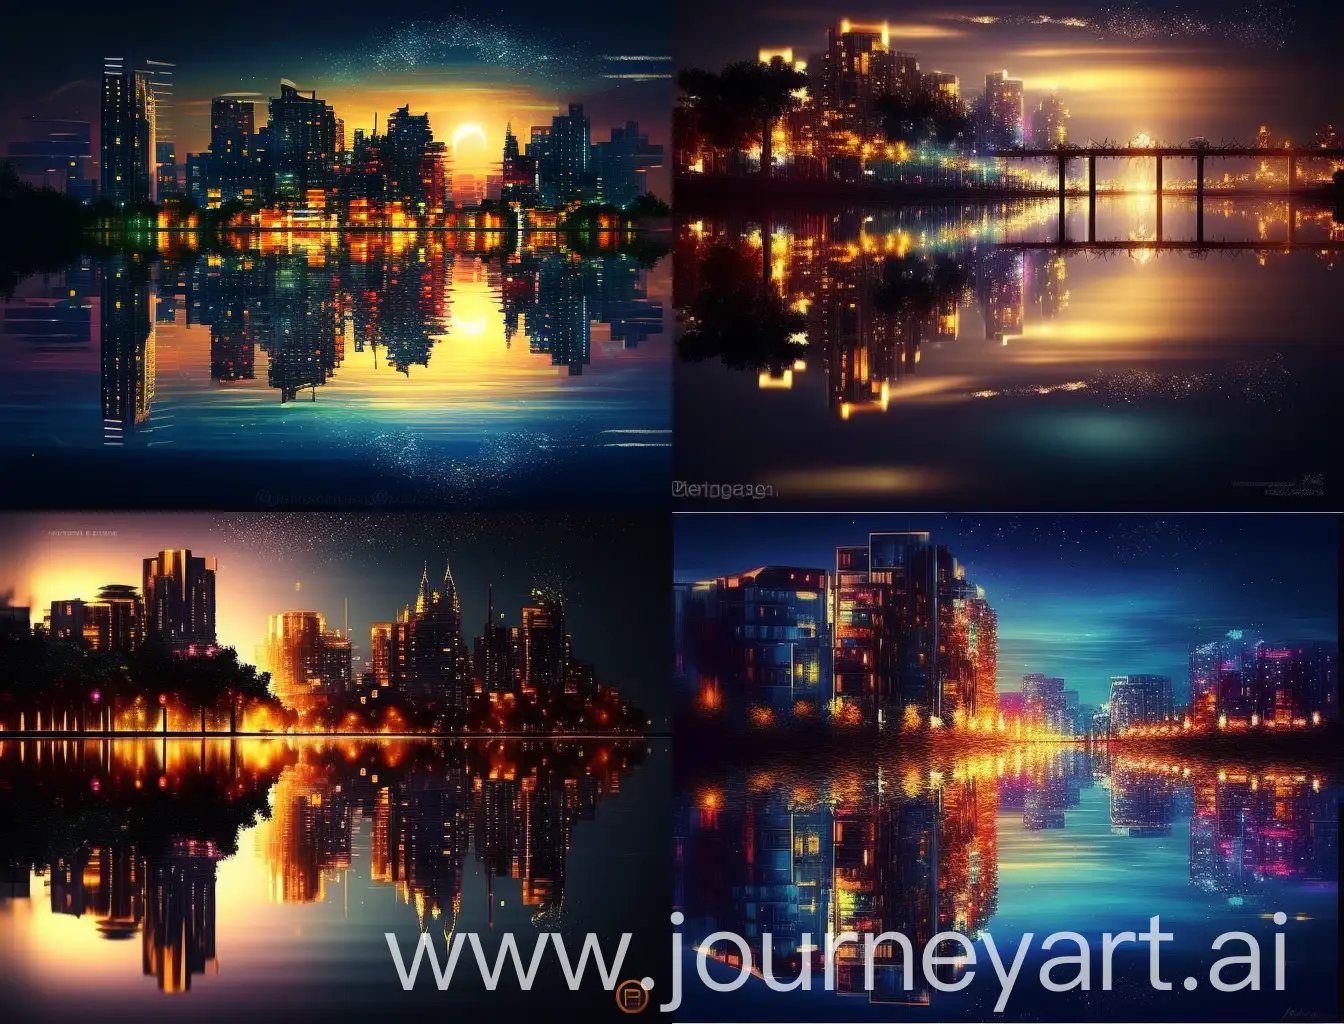 (Best Quality, Masterpiece: 1.2), Ultra-Fine, (Realistic, Realistic, Photo: 1.3), Reflection on the water surface, Outline of the city, Clear architectural lines, Reflected lights, Sparkling water surface, Tranquil water surface, Blur and reality of reflection, Prosperity and tranquility of the city, Color and light in reflection, Interweaving of reflection and reality, Reflection of the city on the water surface, such as picturesque, stunning beauty of the soul, gentle blue waters, spectacular skyline, complete buildings in the water, rich colors and details, Buildings and trees in reflection, Night view of the city, clear reflection, reflection in the water, like another world in the sky, full of magic of light and shadow and watermarks. High resolution: 1.5, high quality light processing: 1.4, unique angle: 1.2, film texture, high definition film.